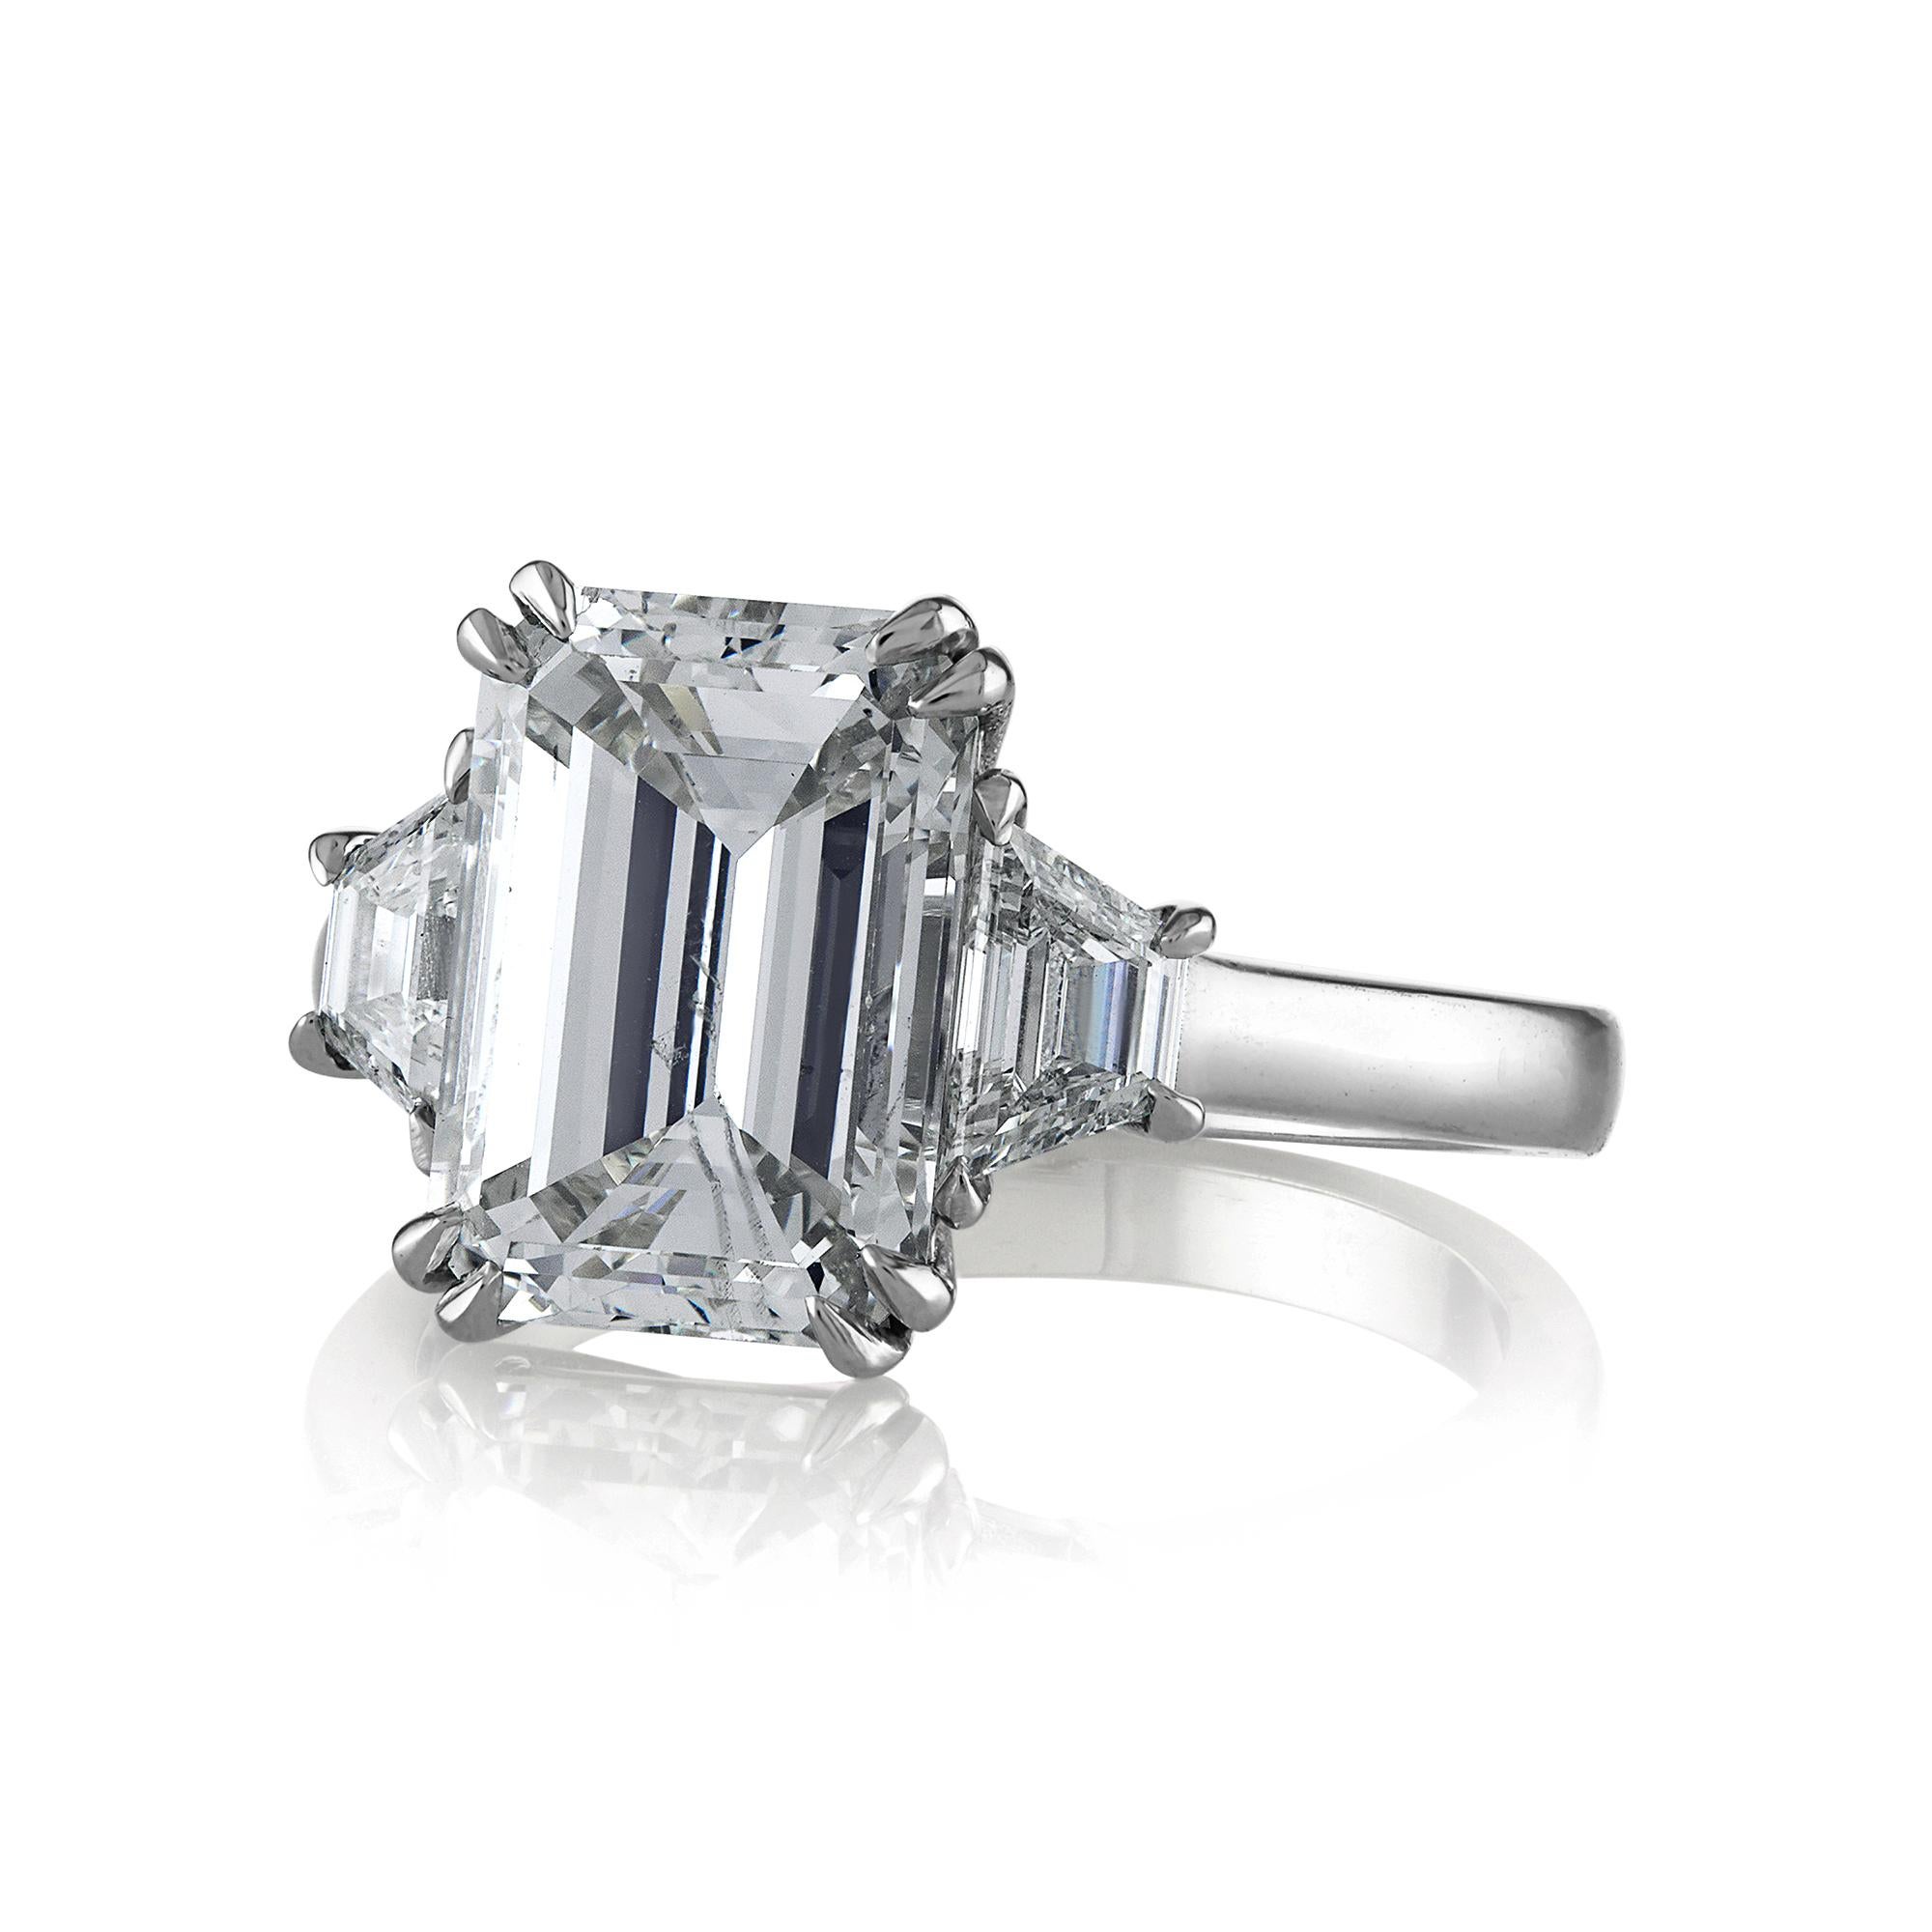 Impressive GIA 4.29ctw Emerald Cut Trilogy Diamond Engagement Anniversary Platinum Ring

This Impressive ring will take your breath away! Wonderful opportunity to own a HUGE 100% NATURAL NONE-treated, Great Quality diamond for an exceptional